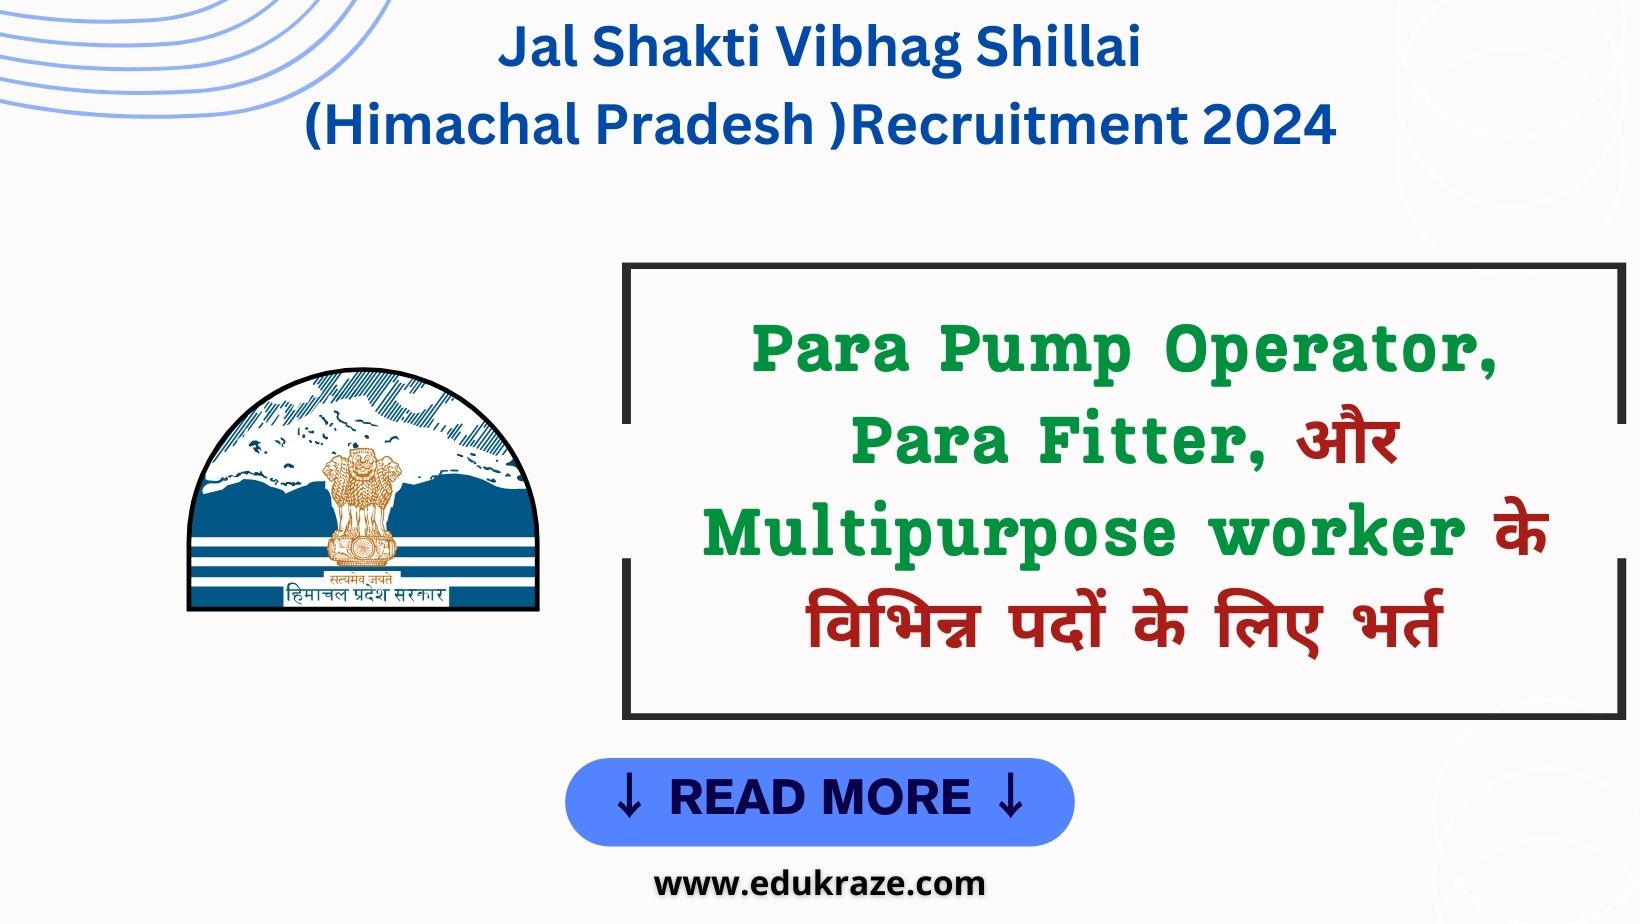 HP Jal Shakti Vibhag Division Shillai Recruitment 2024 Out for Para Pump Operator, Para Fitter & Multipurpose Worker Positions